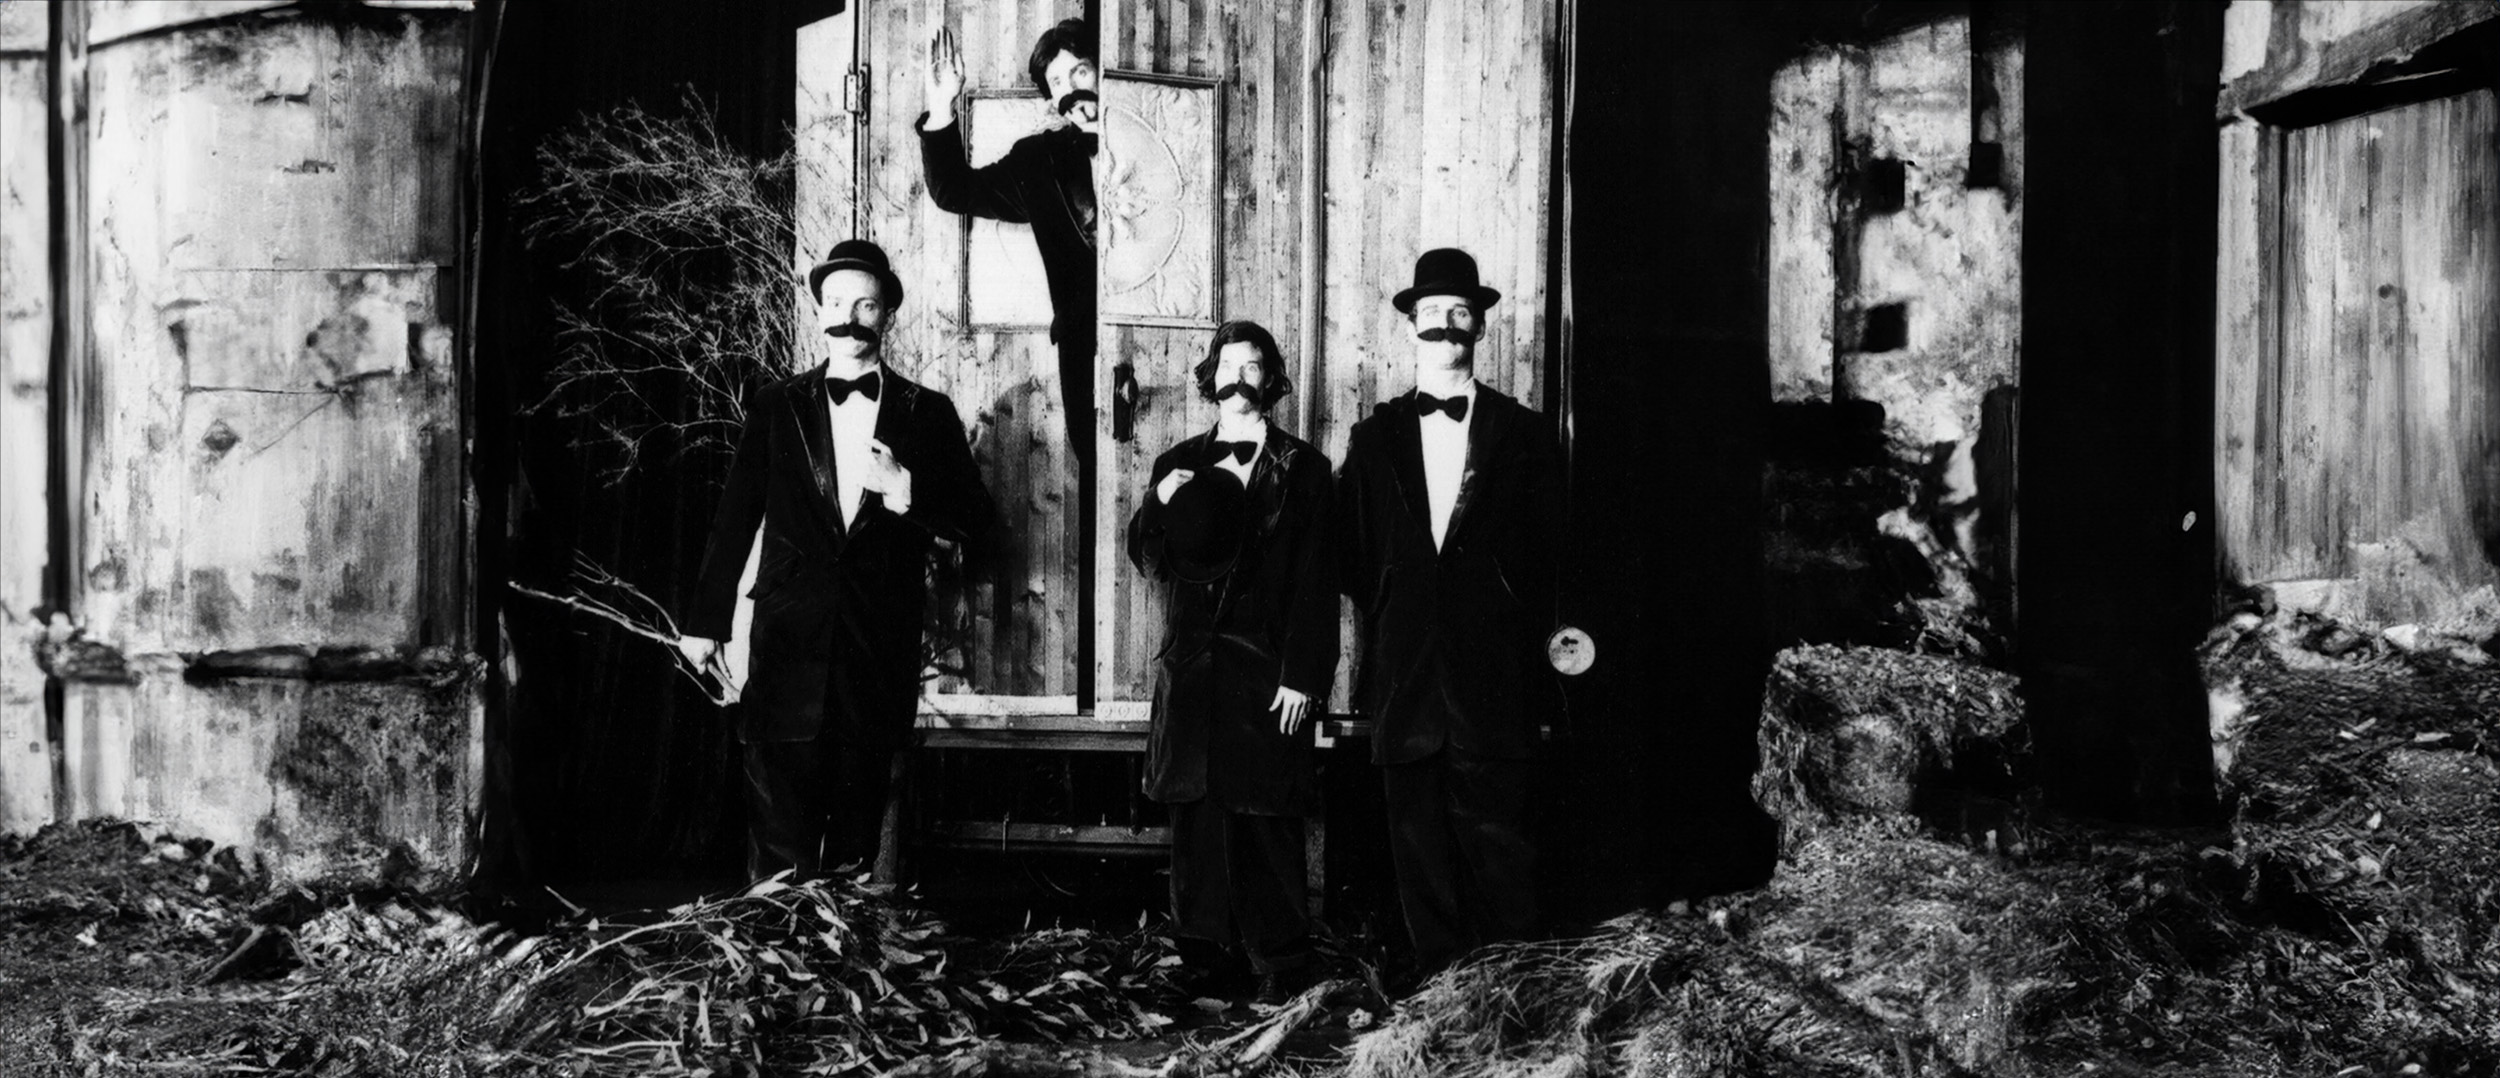 Snuff Puppets board image shows four people dressed up as men fron the 1910s